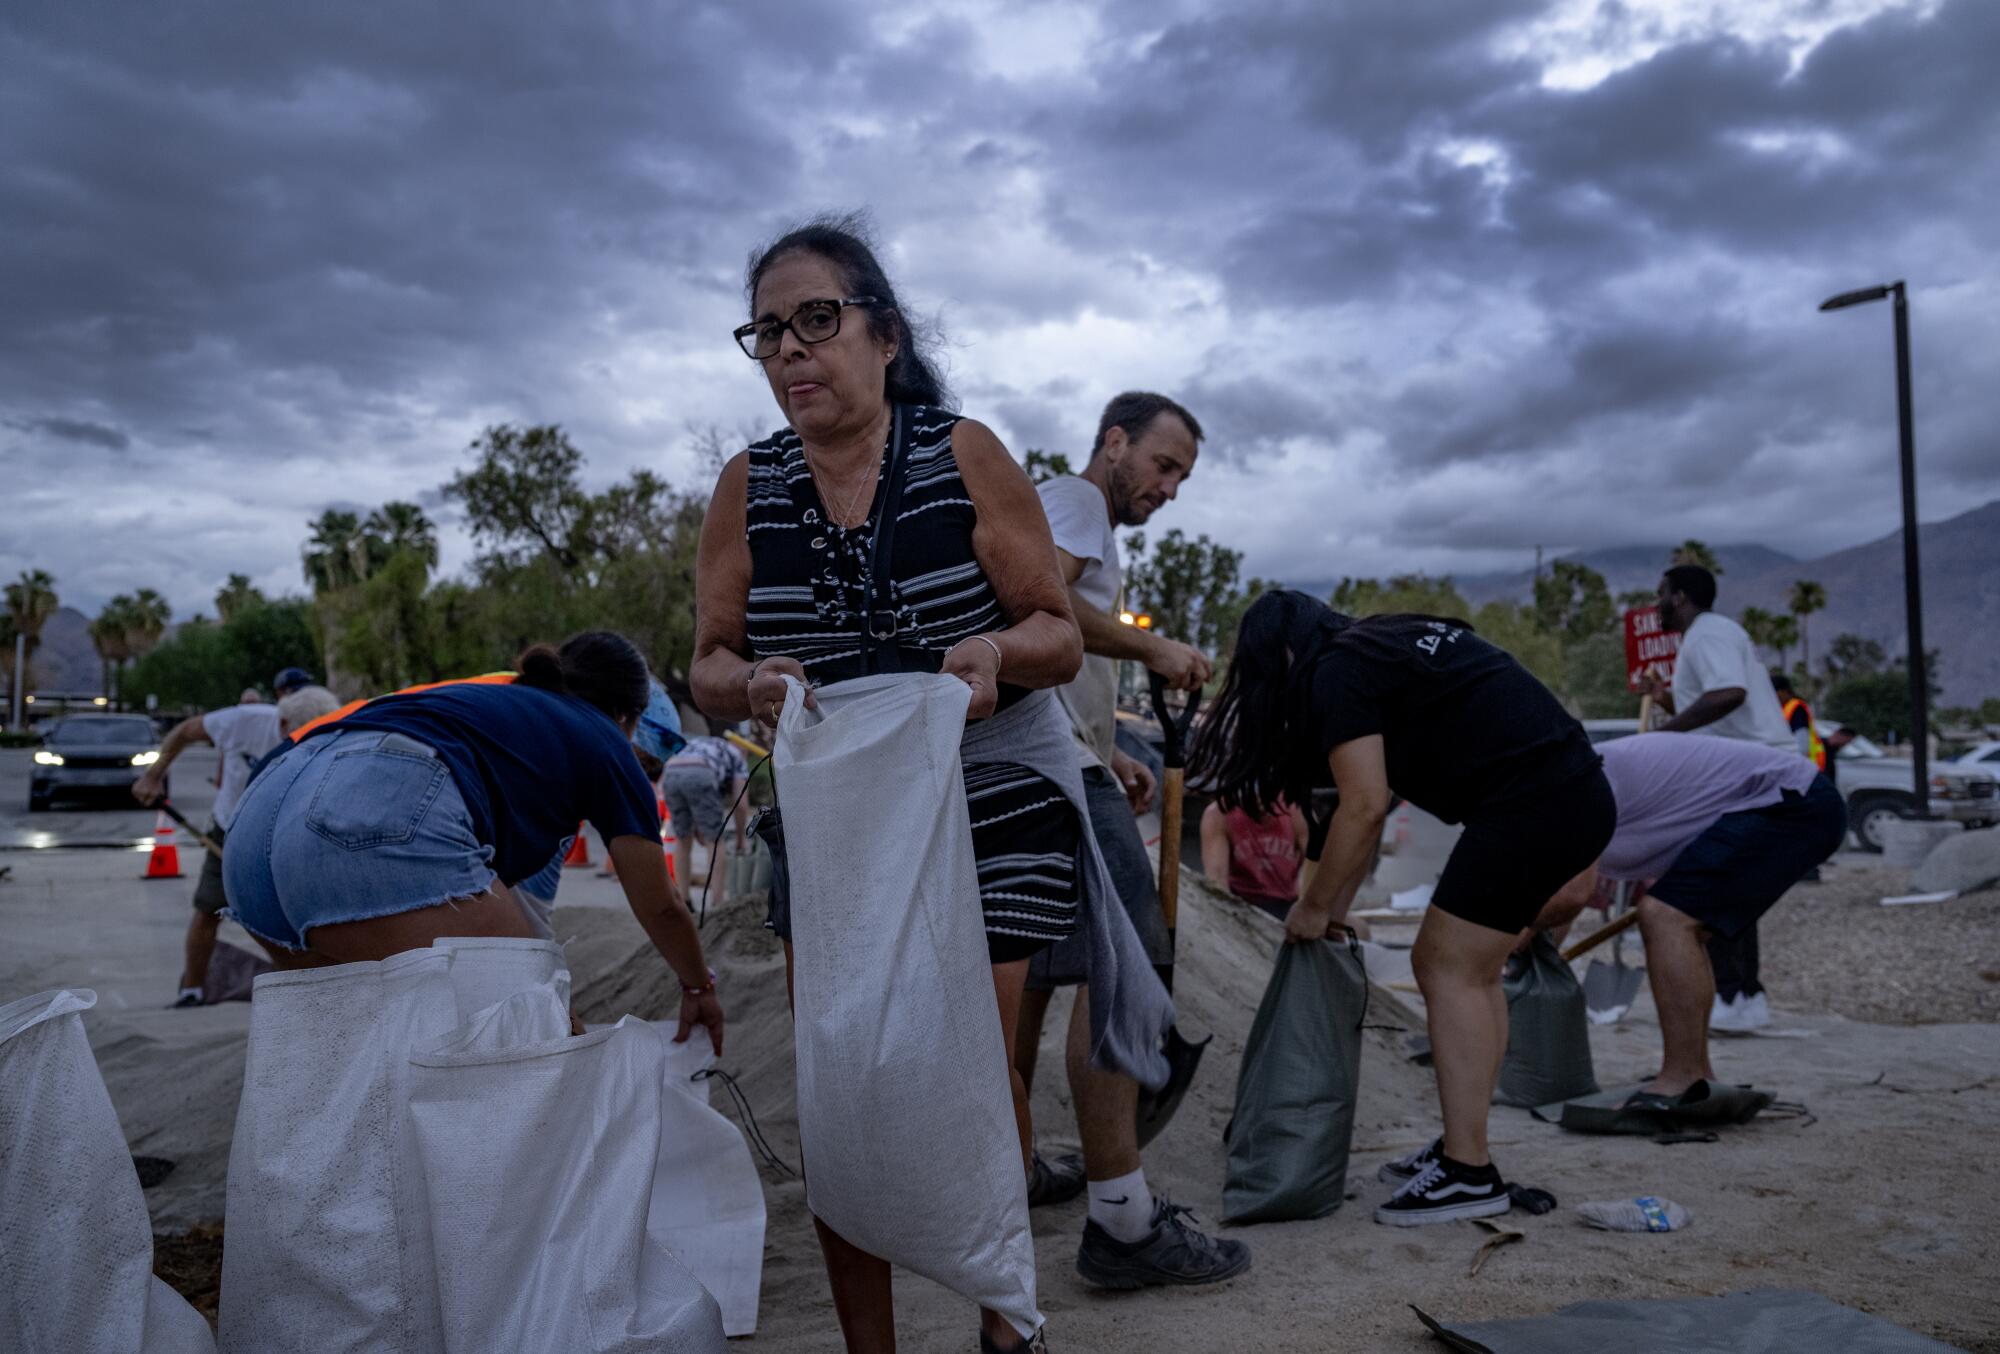 With storm clouds looming overhead, Bernadette Duran of San Gabriel carries sandbags to protect her vacation home.